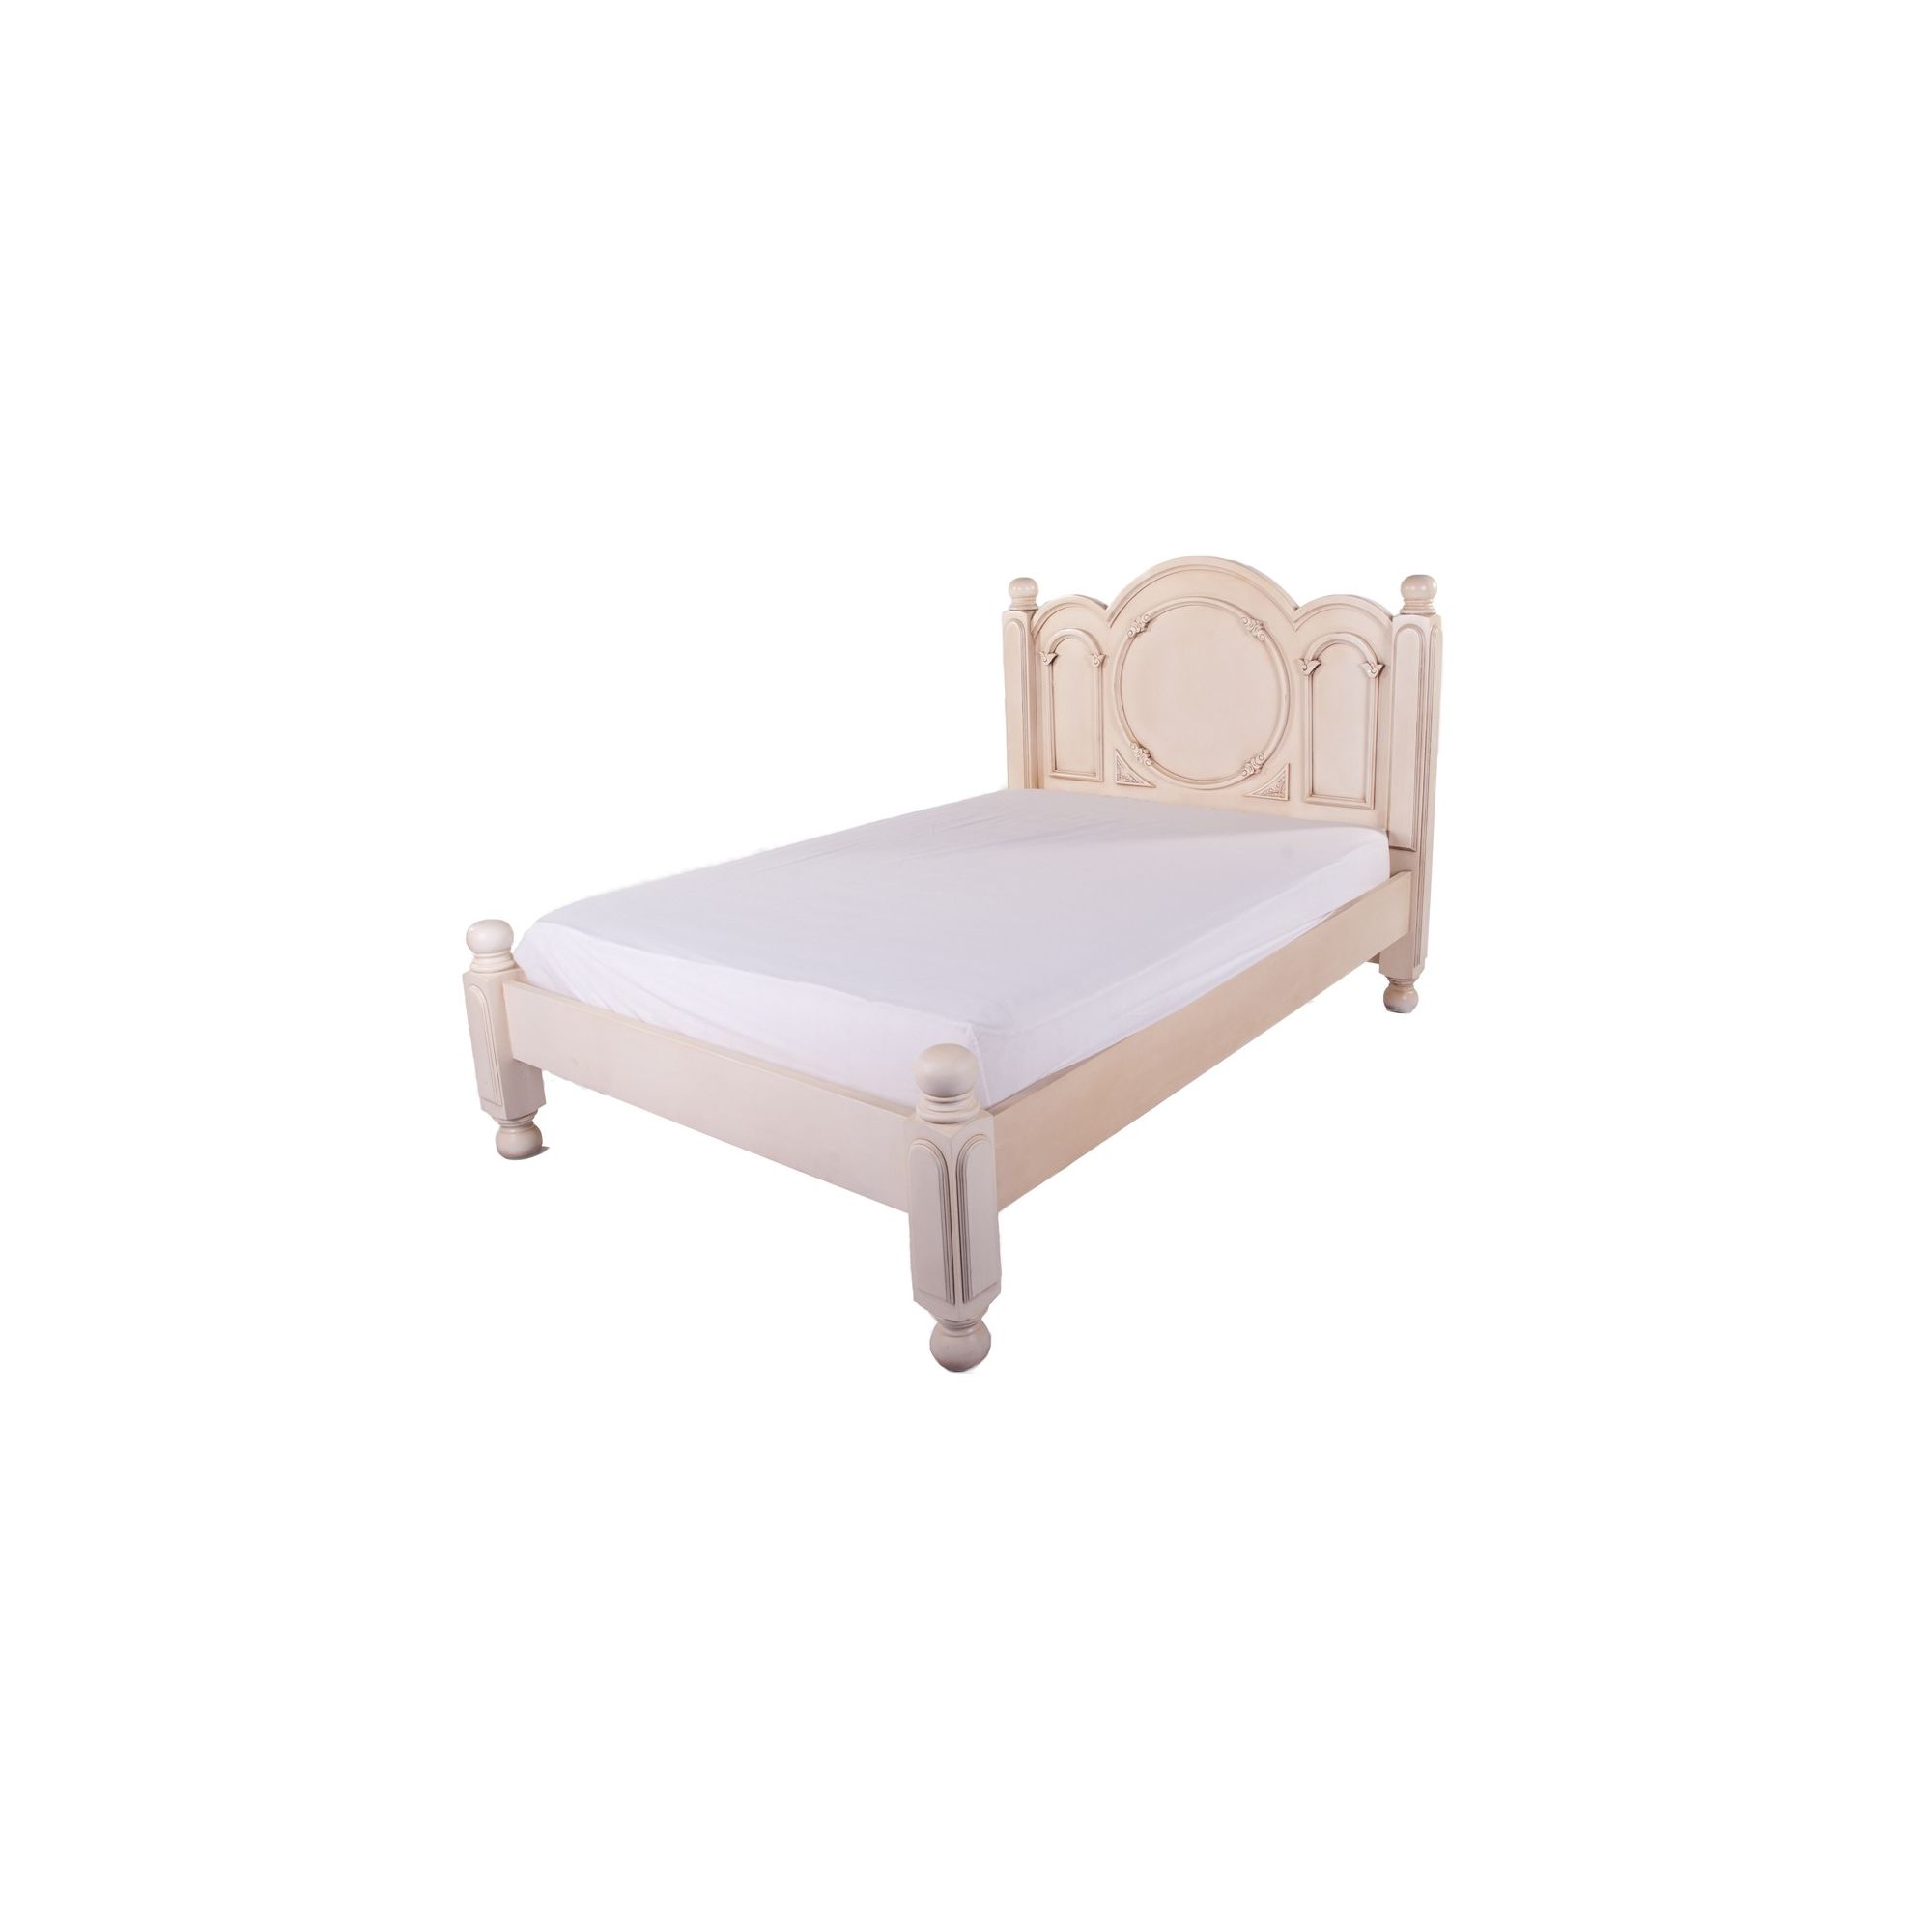 Thorndon Beverley Bed Frame - King at Tesco Direct